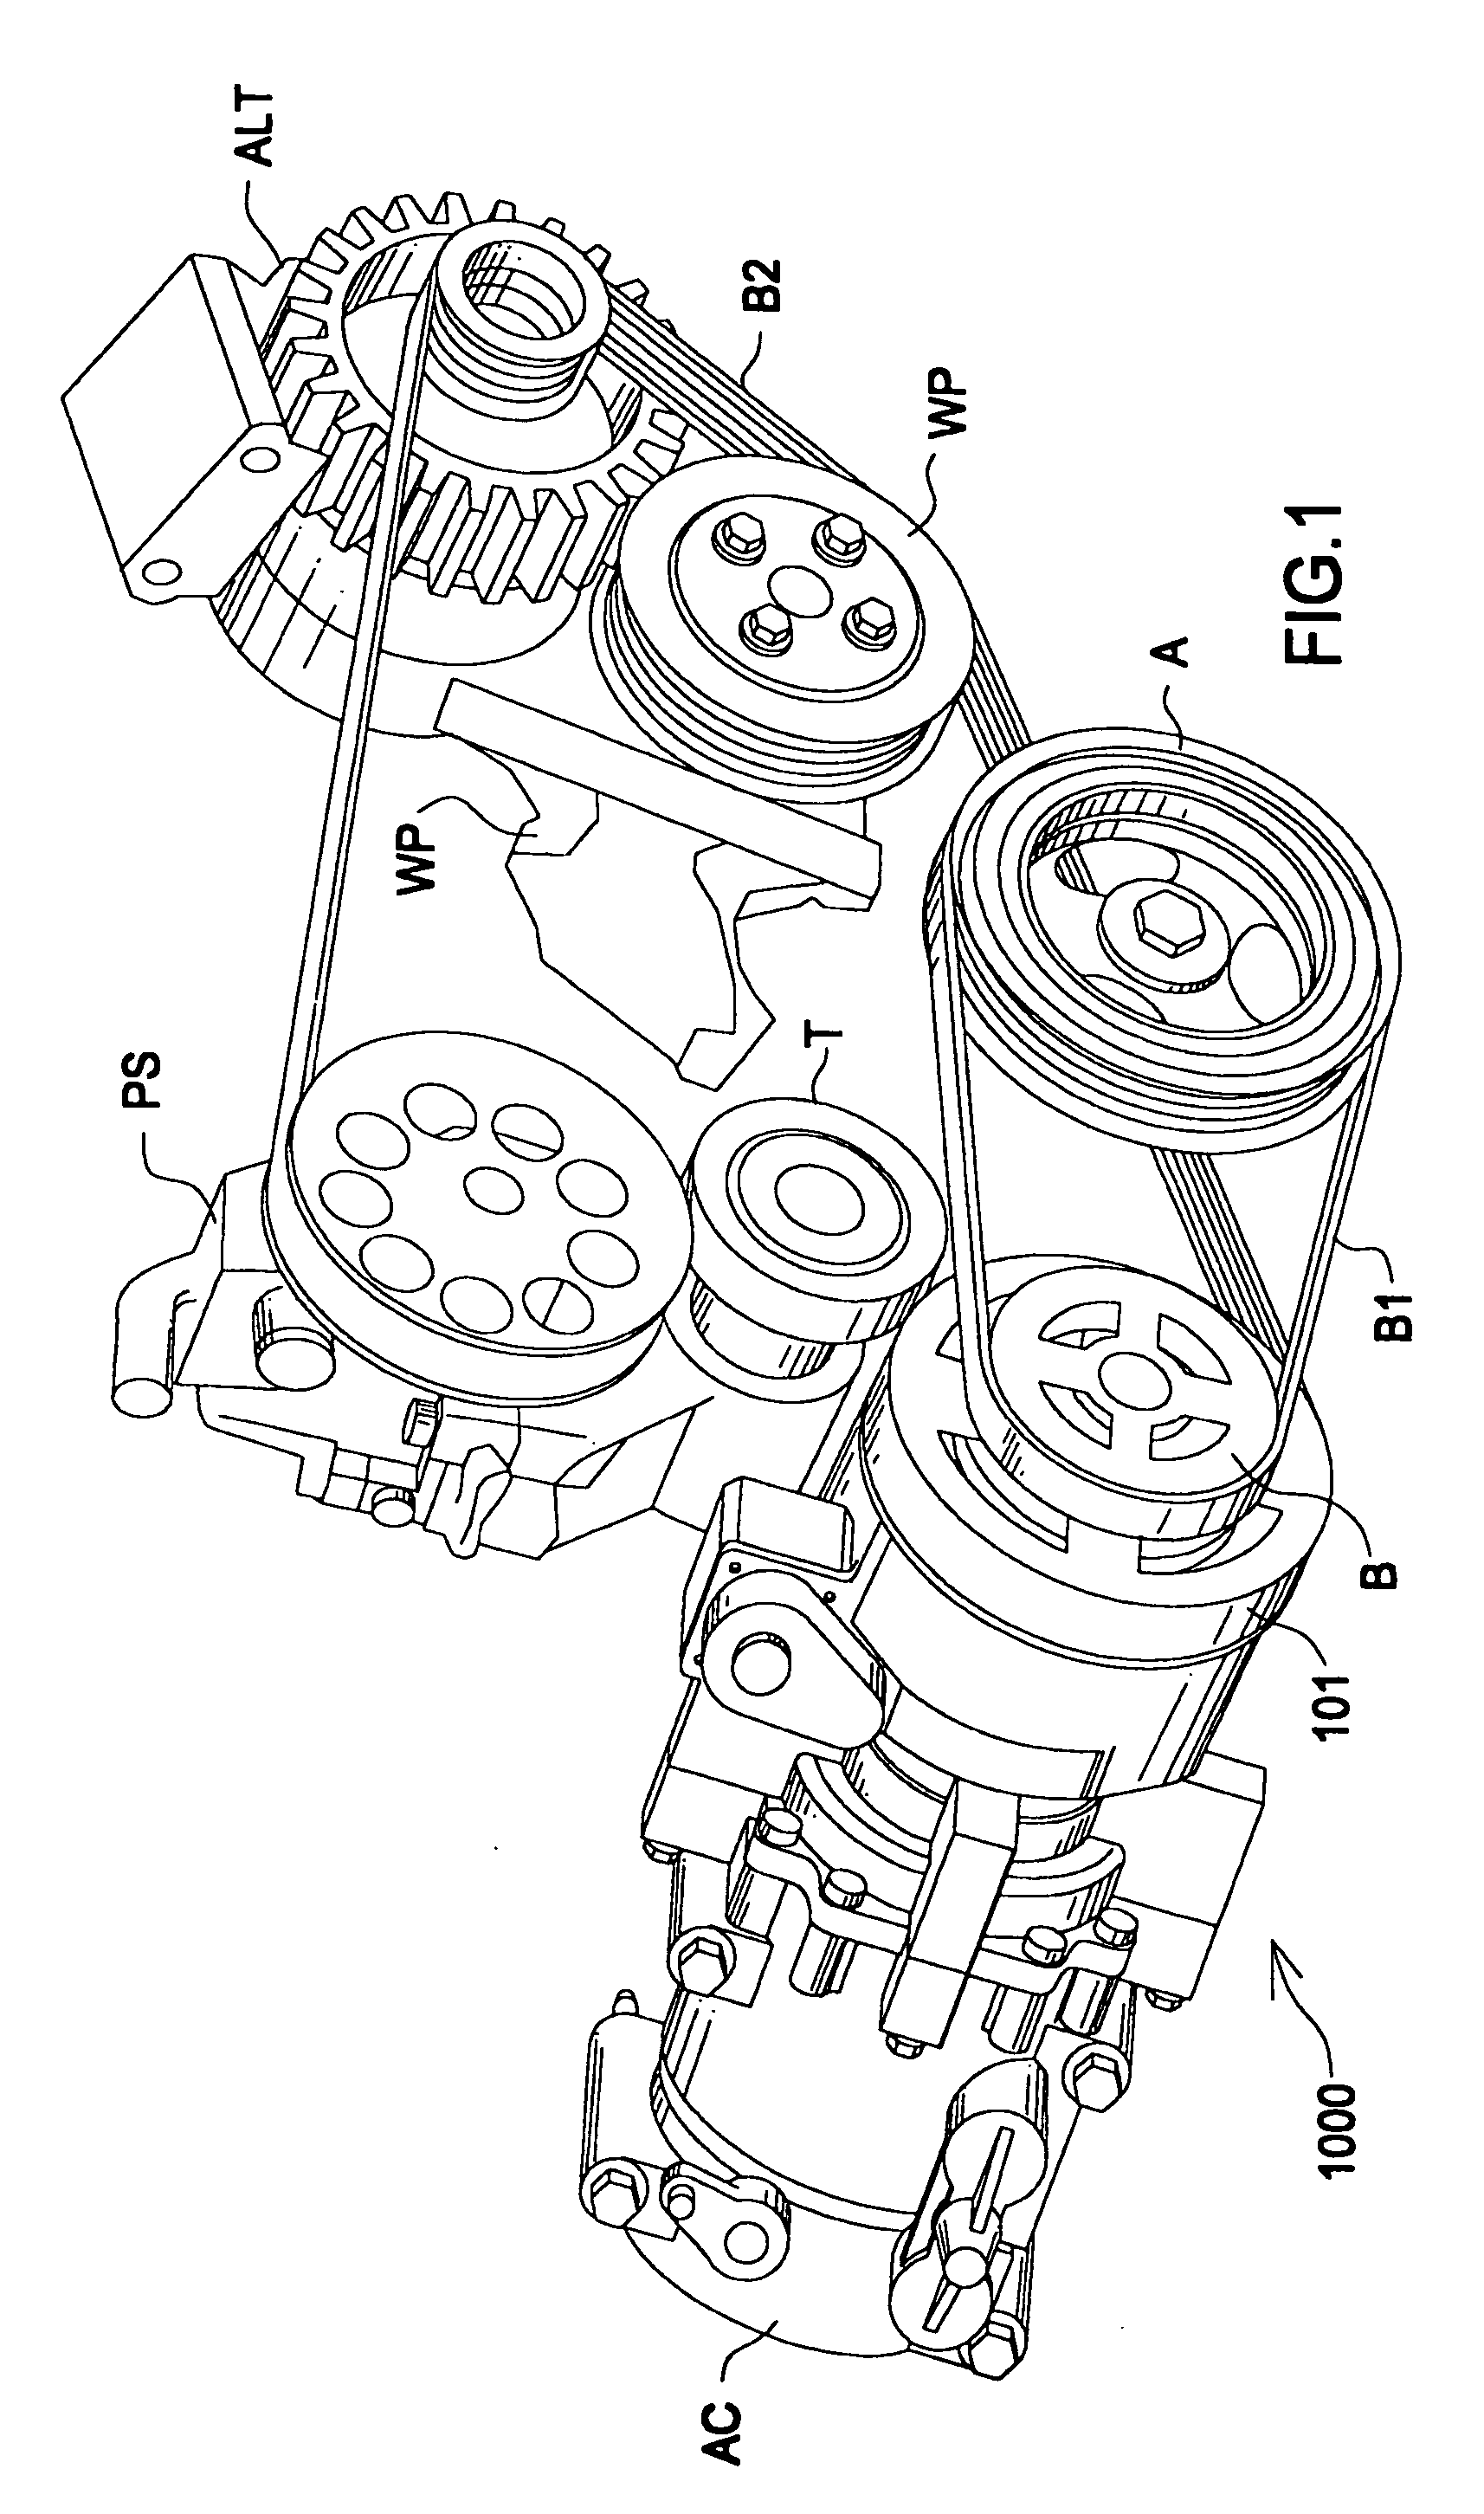 Transmission and constant speed accessory drive